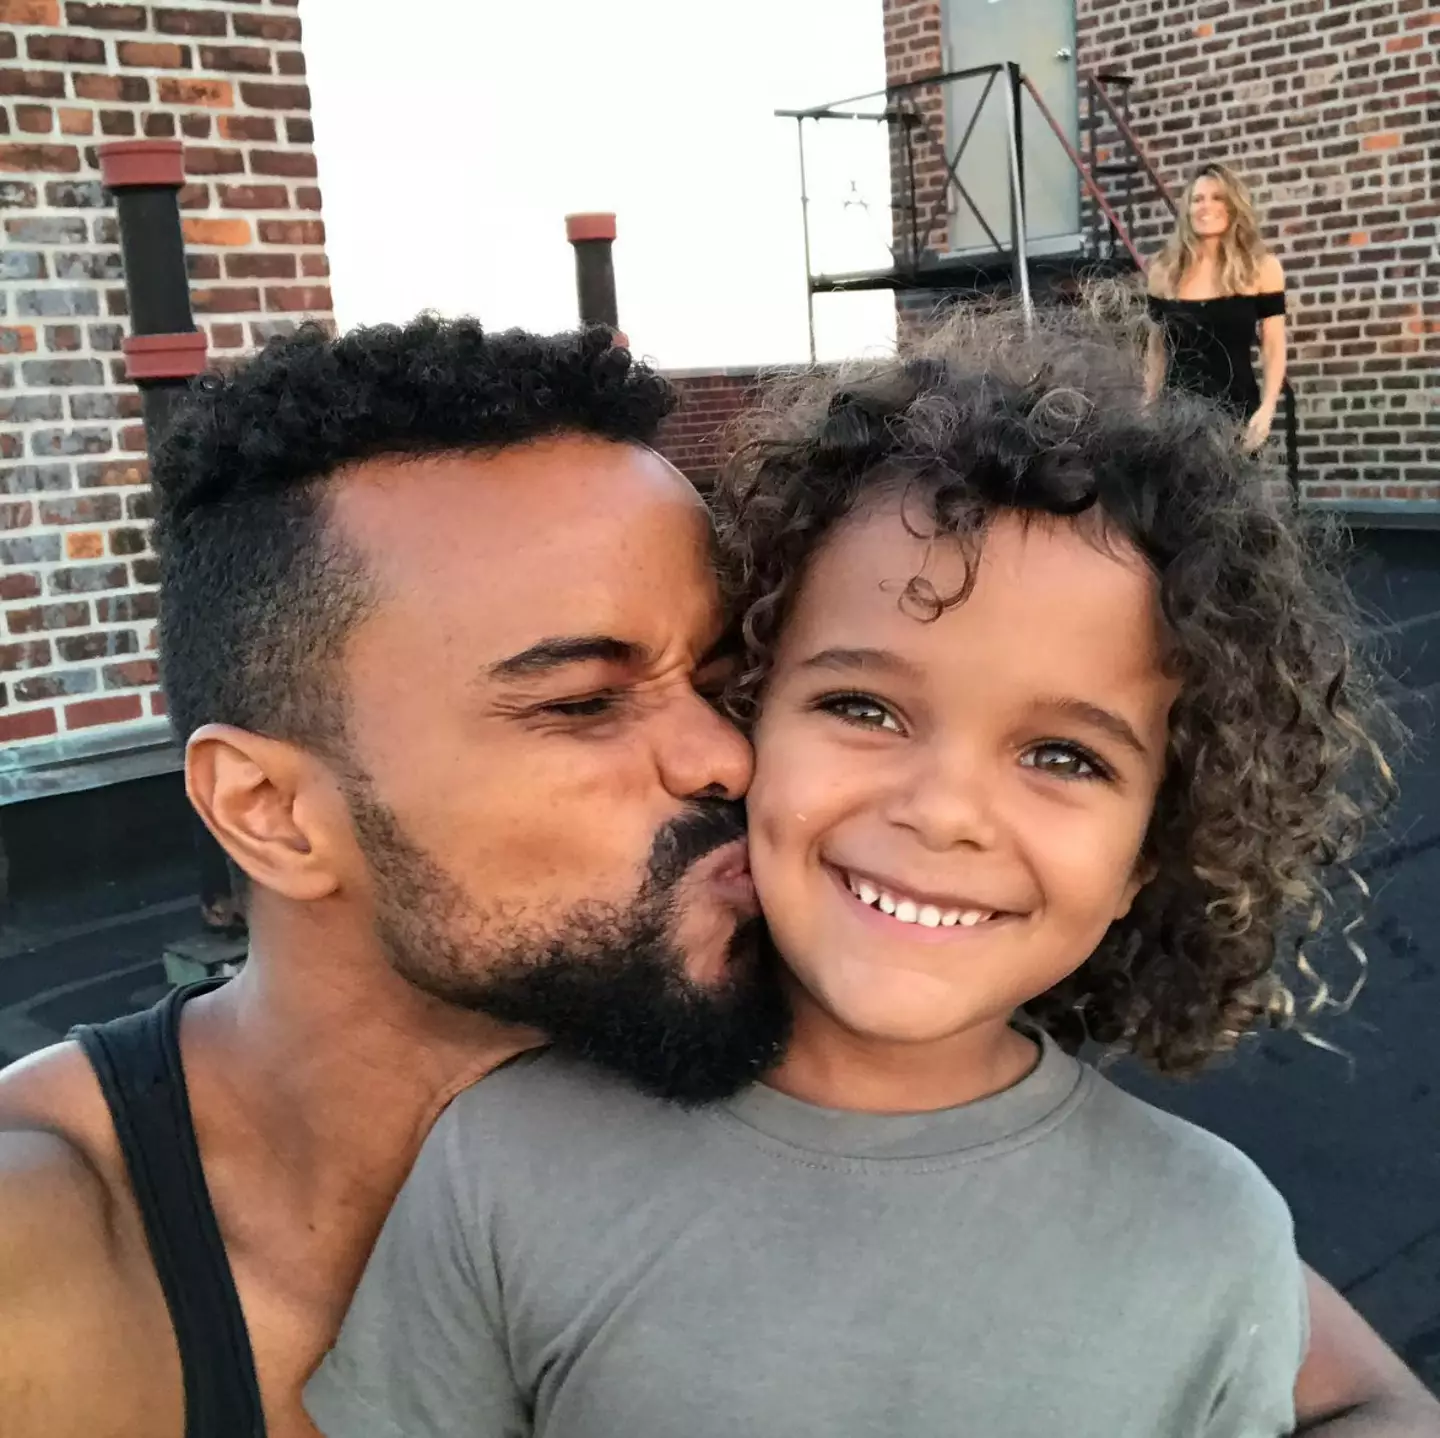 Marvel actor Eka Darville put a pause to his career when 10-year-old Mana was diagnosed with an aggressive form of brain cancer.